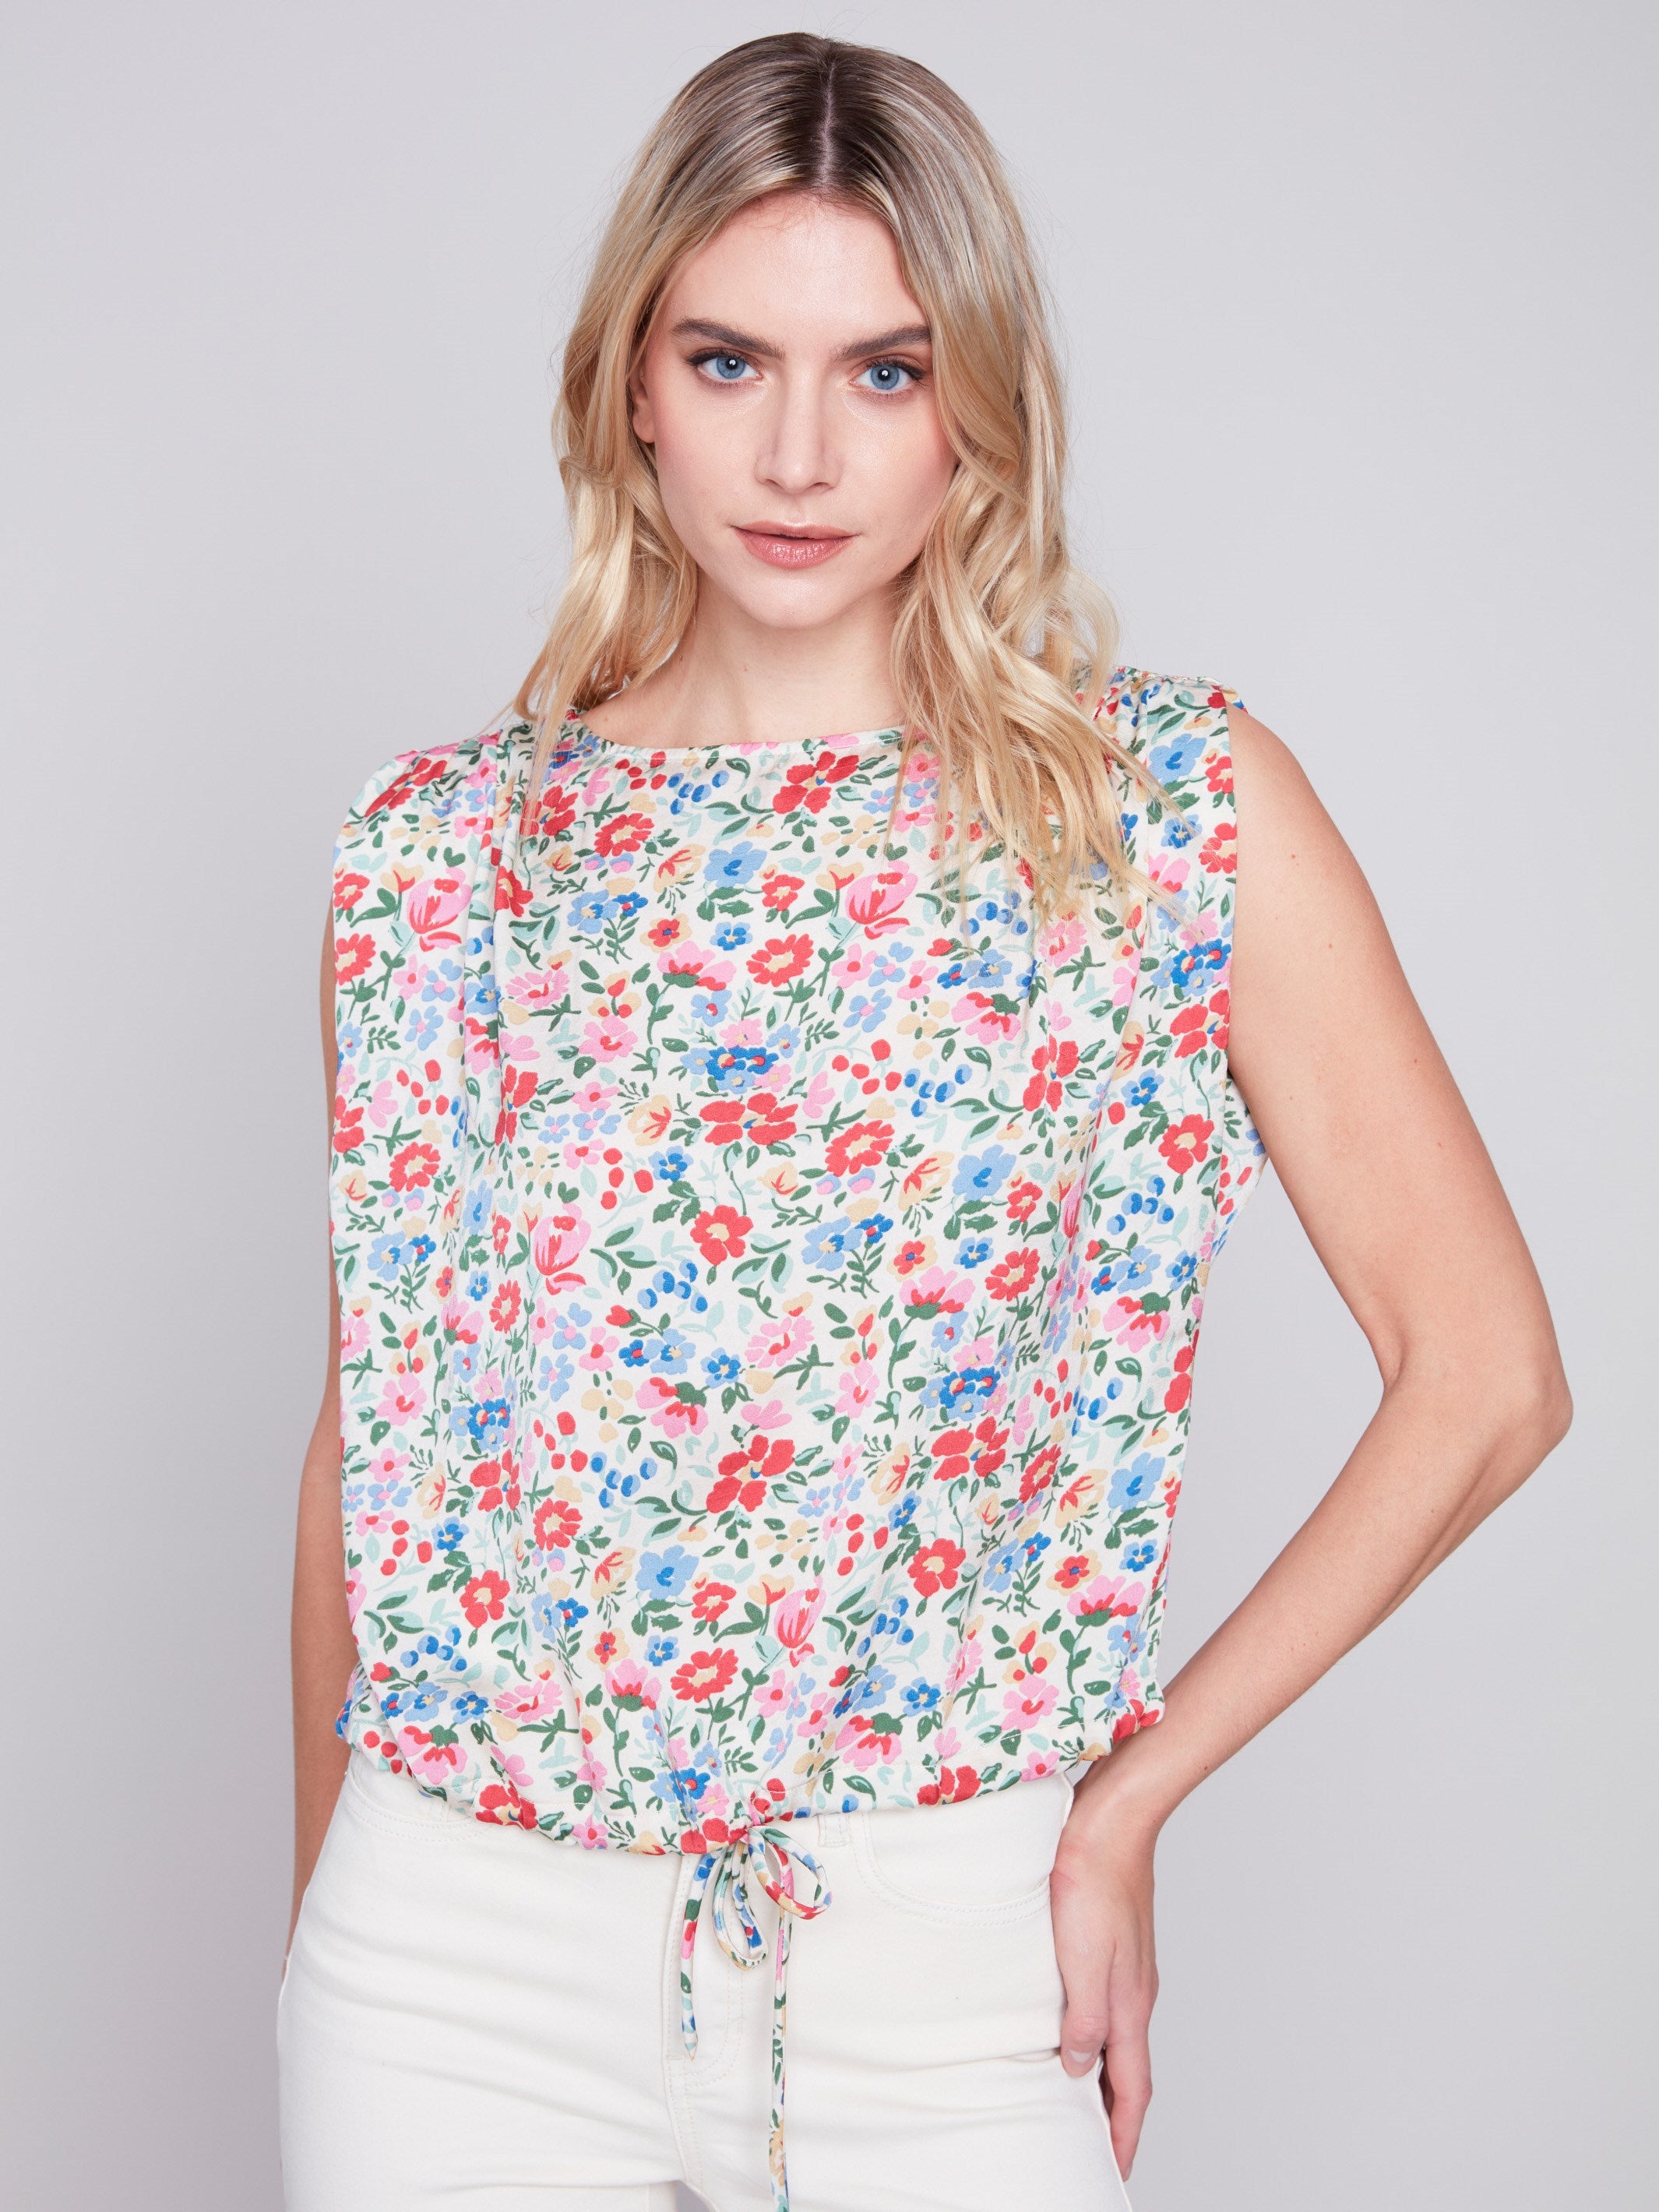 Printed Sleeveless Satin Top With Drawstring - Ditsy - Charlie B Collection Canada - Image 1